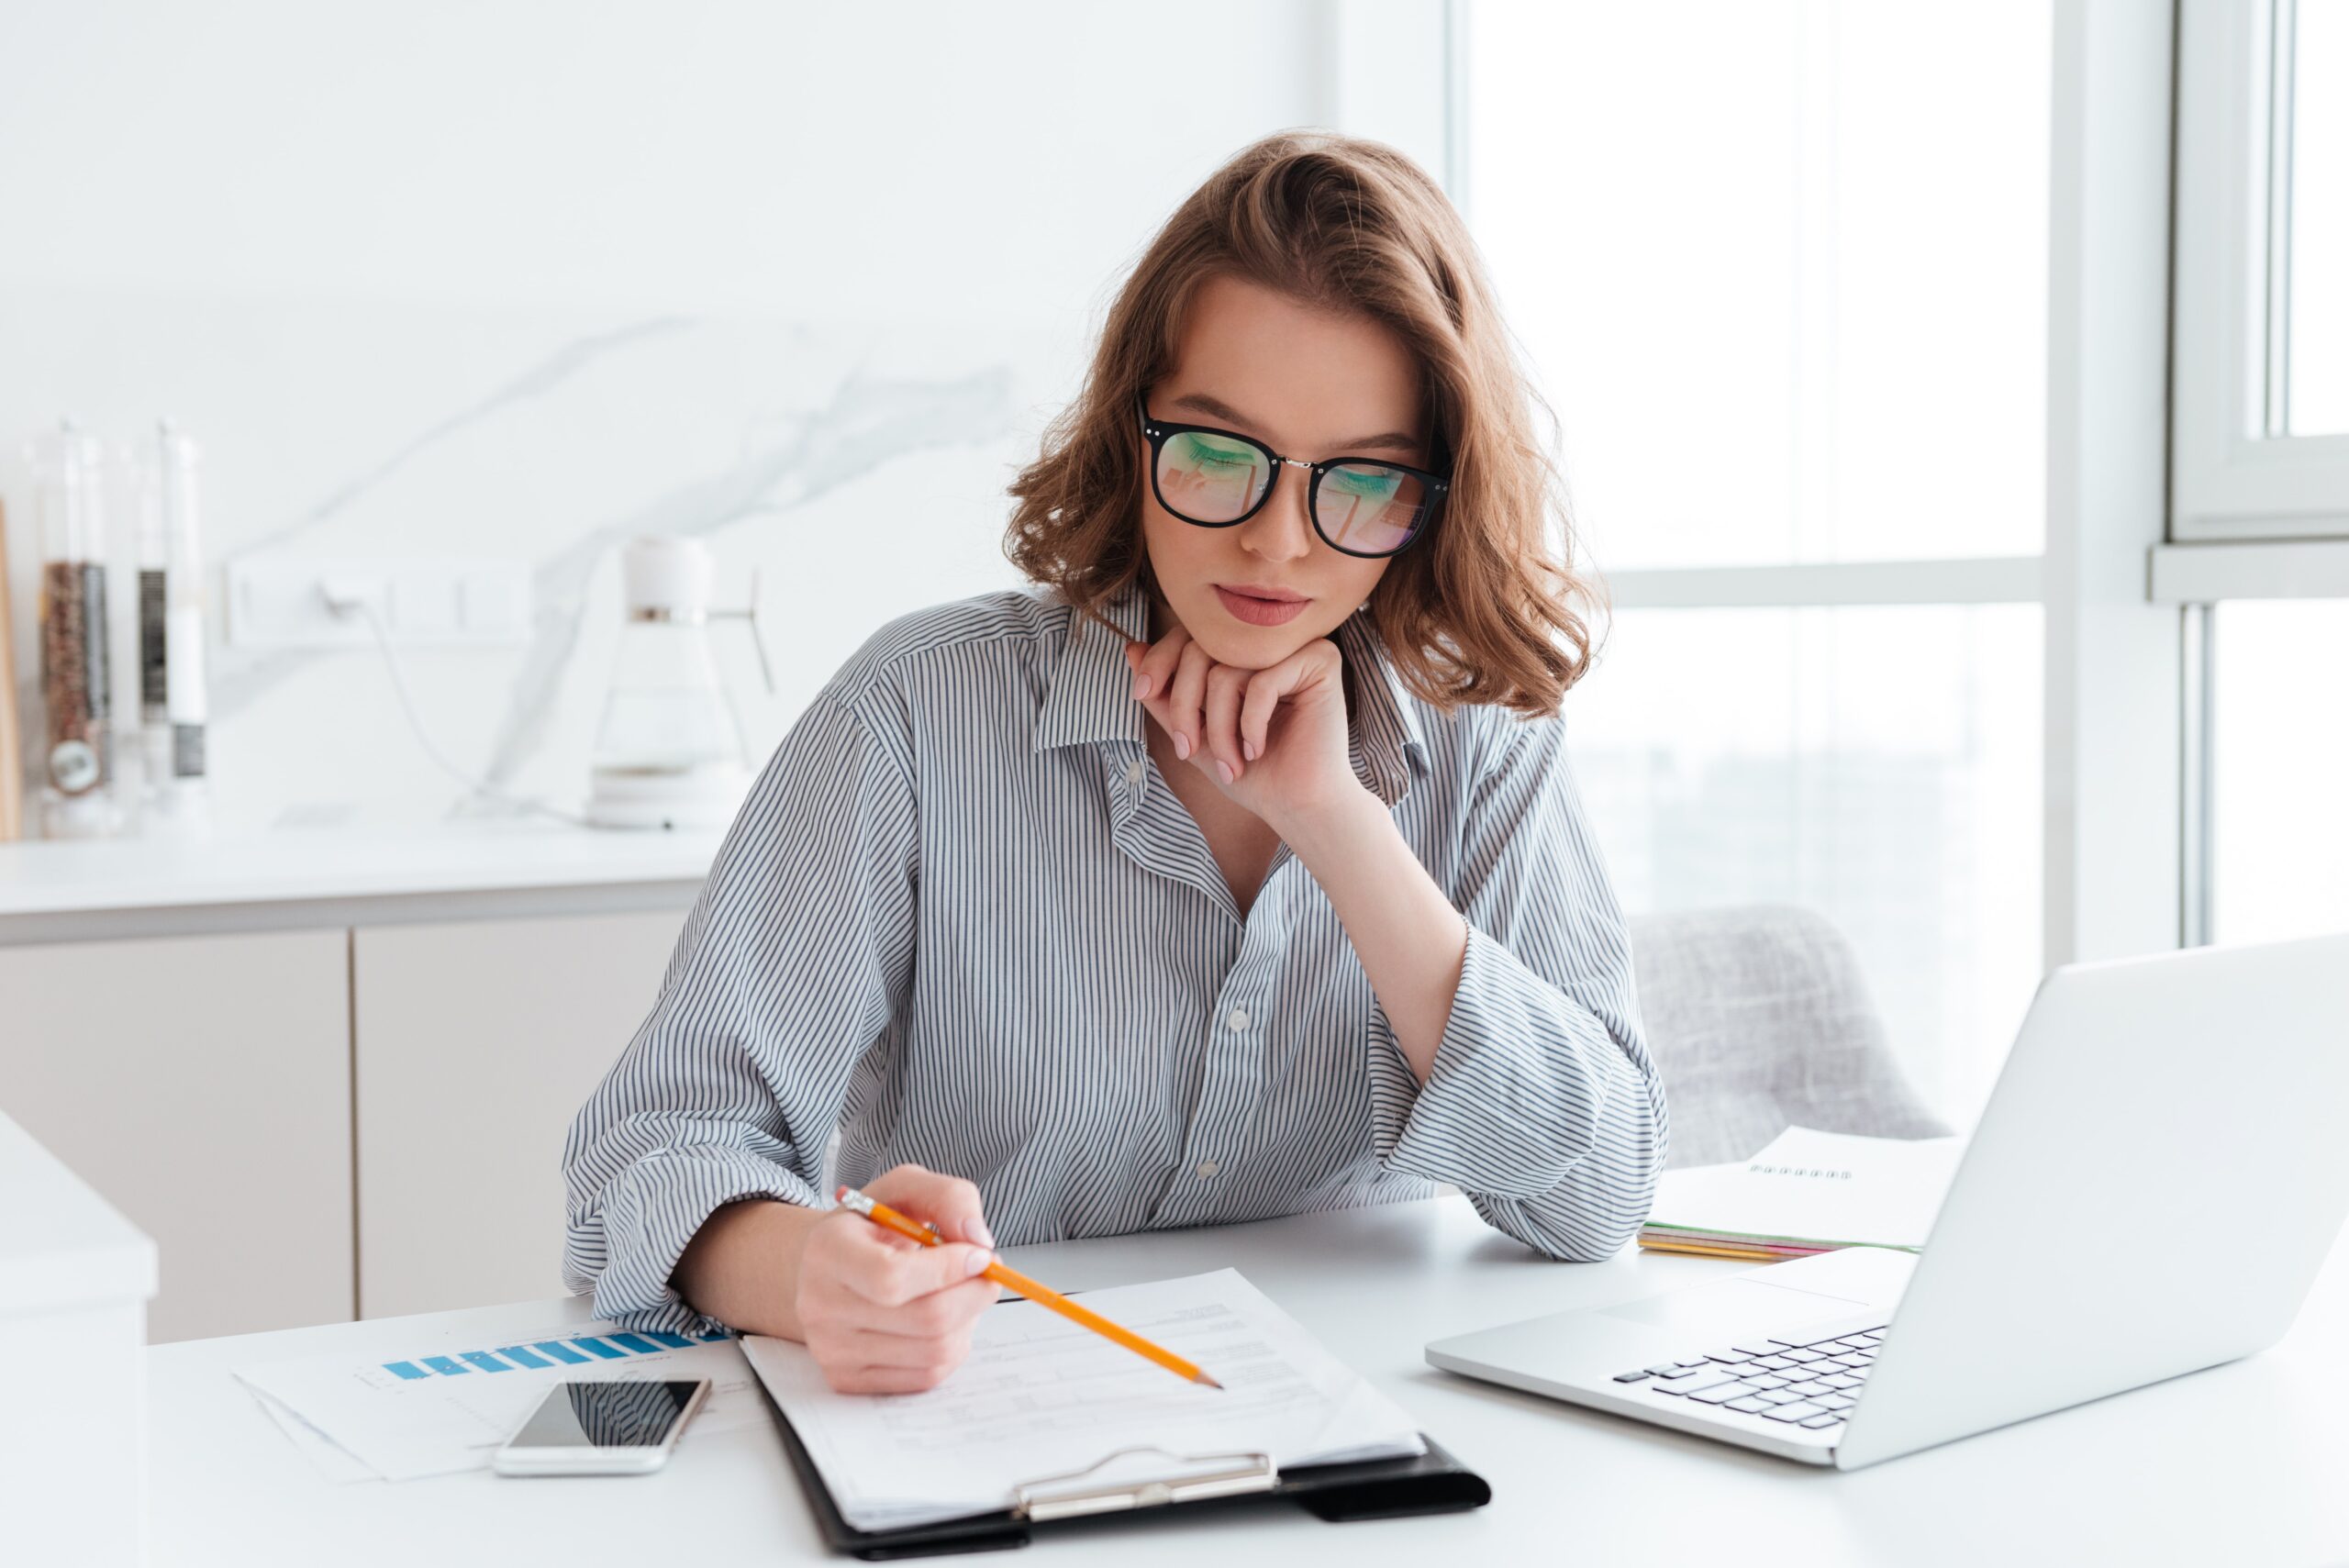 https://doradcy365.pl/wp-content/uploads/2021/10/young-concentrated-businesswoman-glasses-striped-shirt-working-with-papers-home-min-scaled.jpg